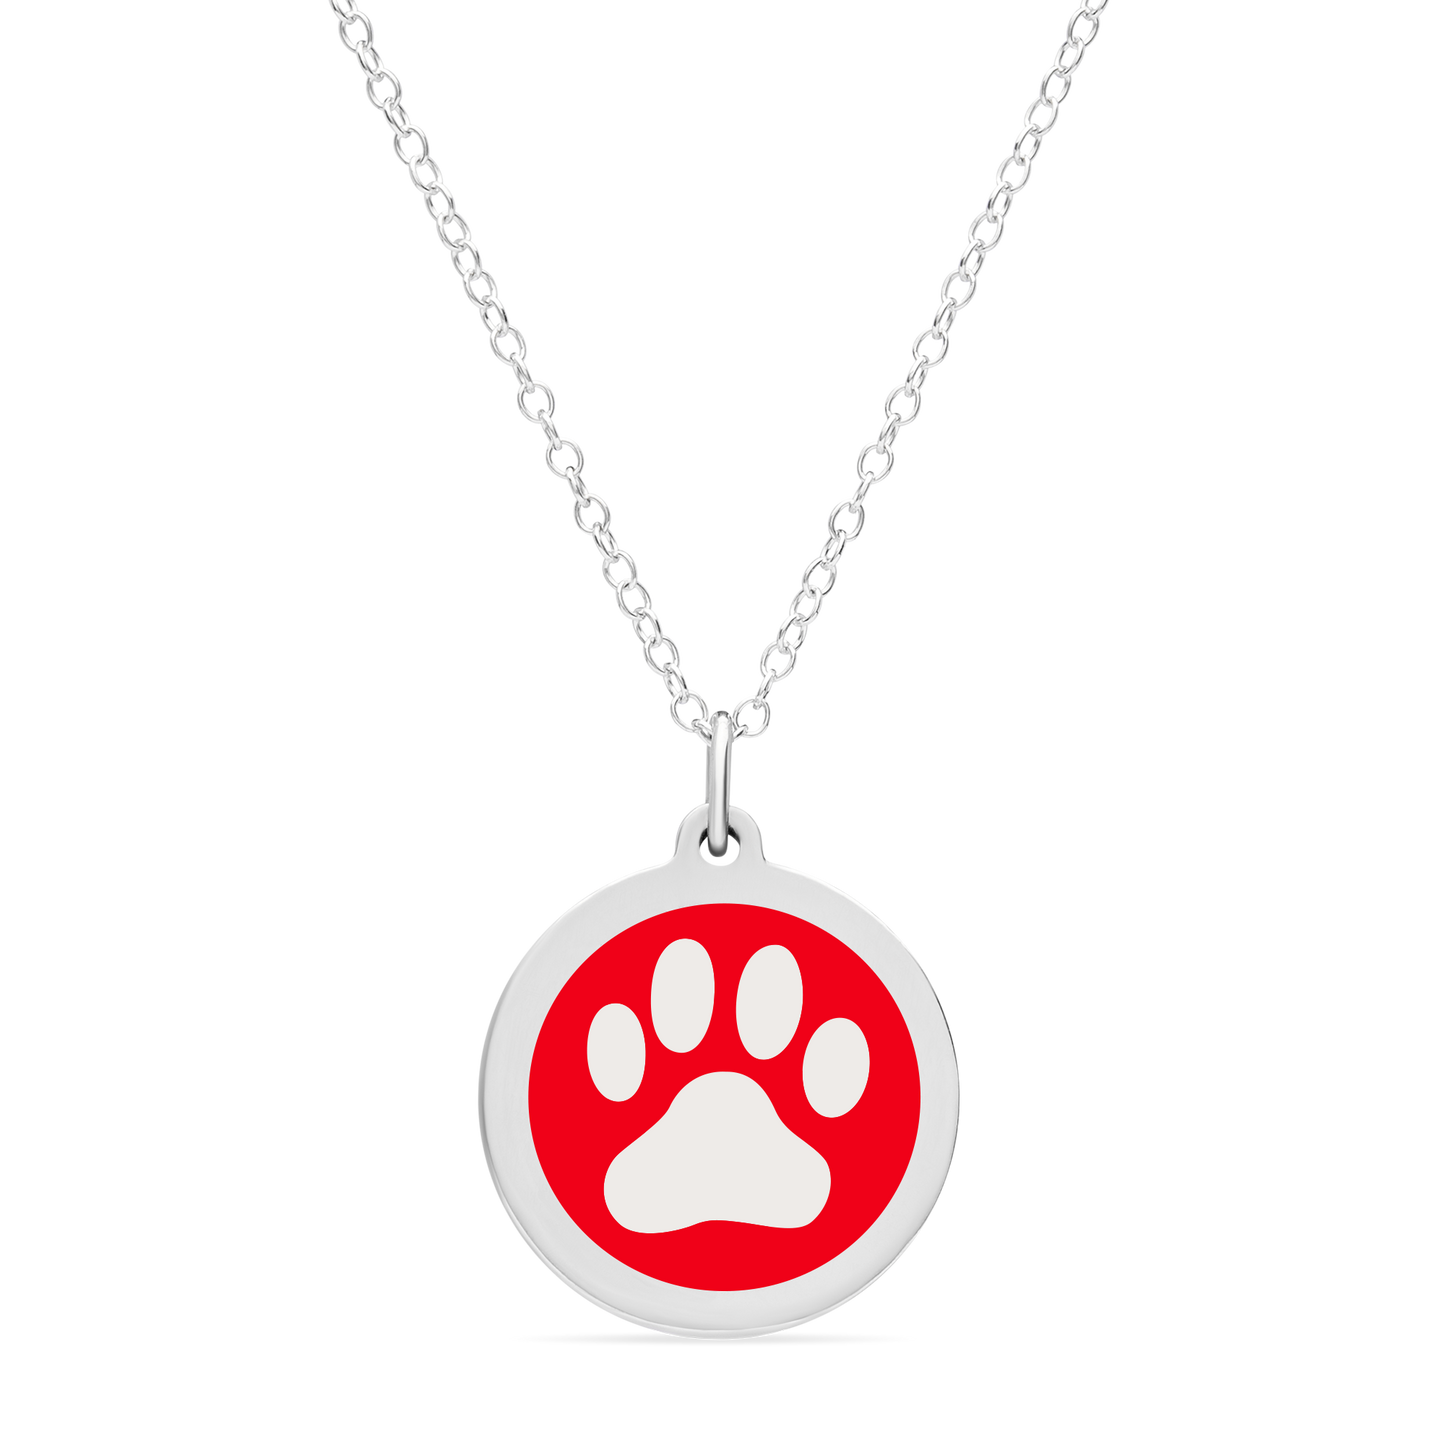 ORIGINAL PAW PRINT CHARM in sterling silver with rhodium plate